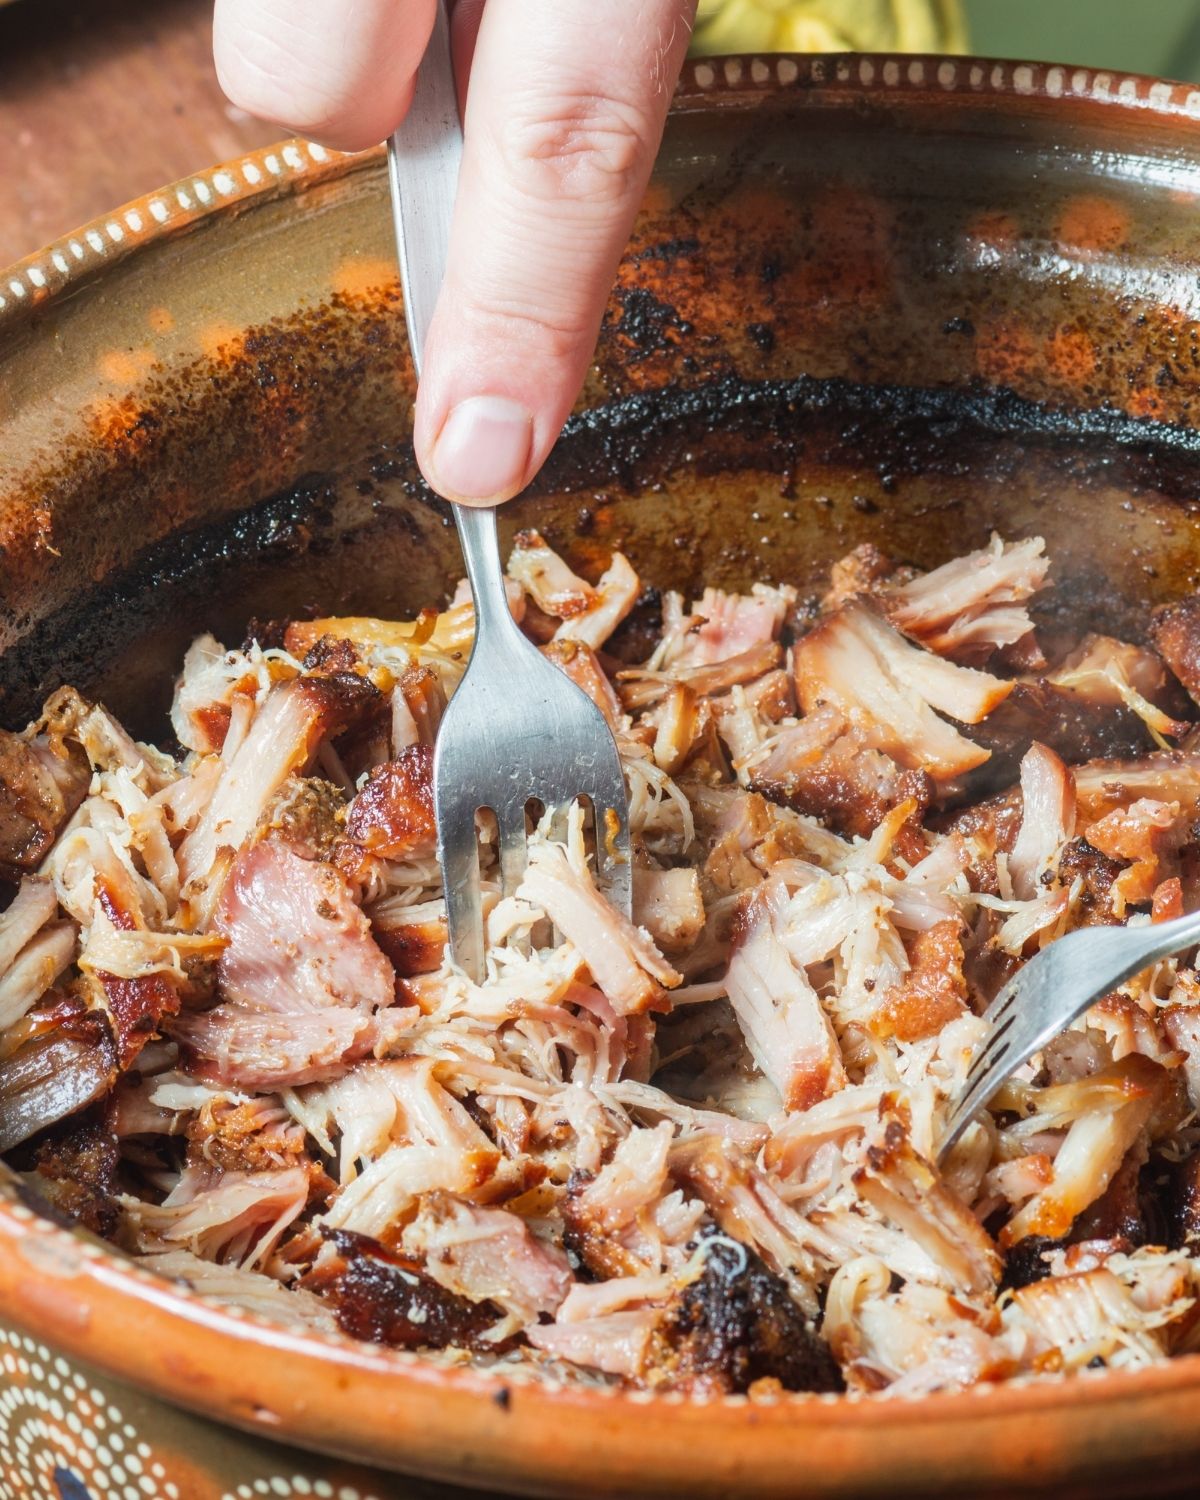 Cooked pulled pork in the crock pot being shredded by a fork.